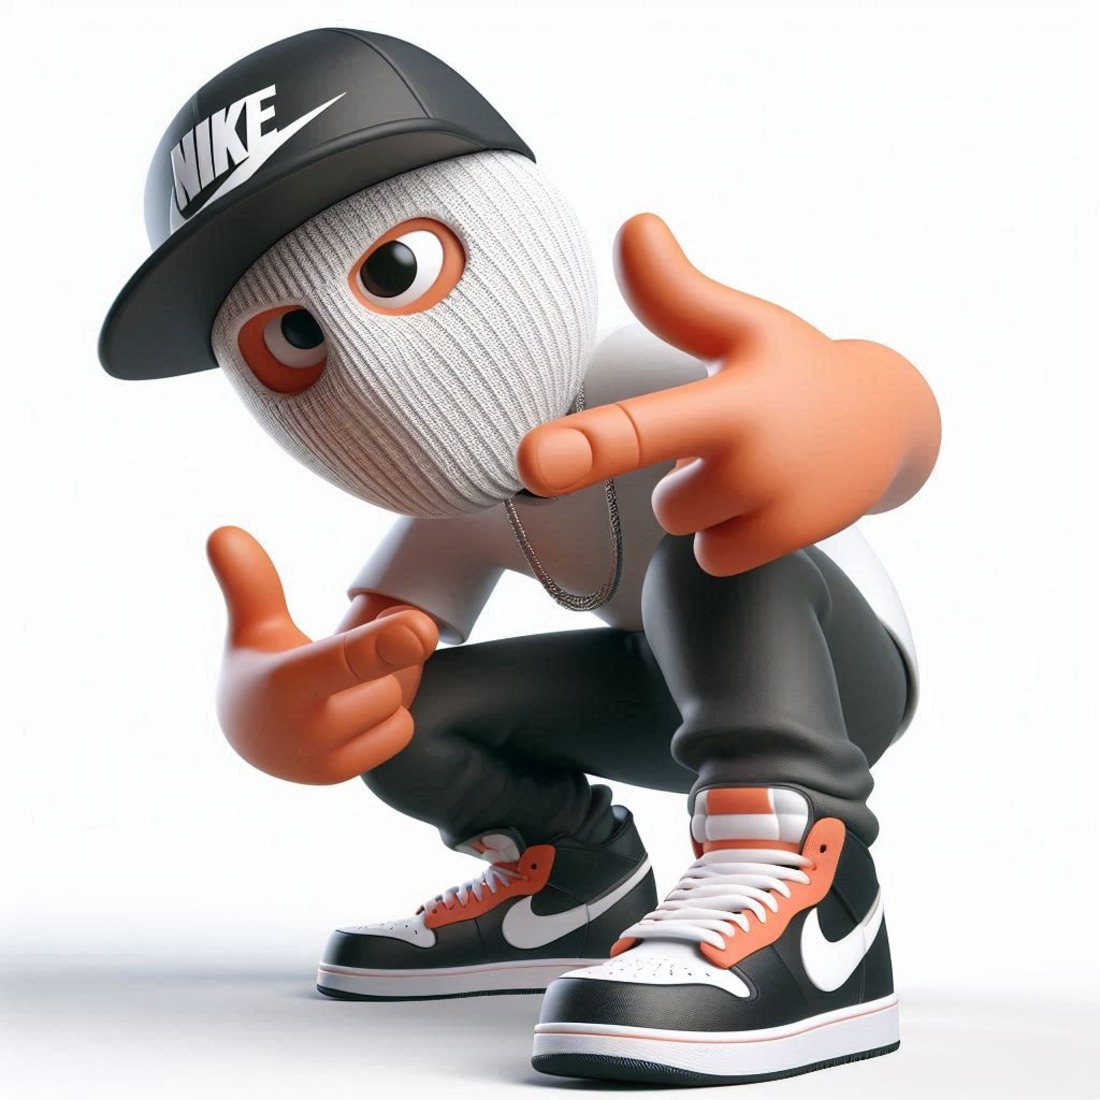 Nike Urban Street Wear 3D Gangsta Rap Collectible Characters 2nd Edition preview image.